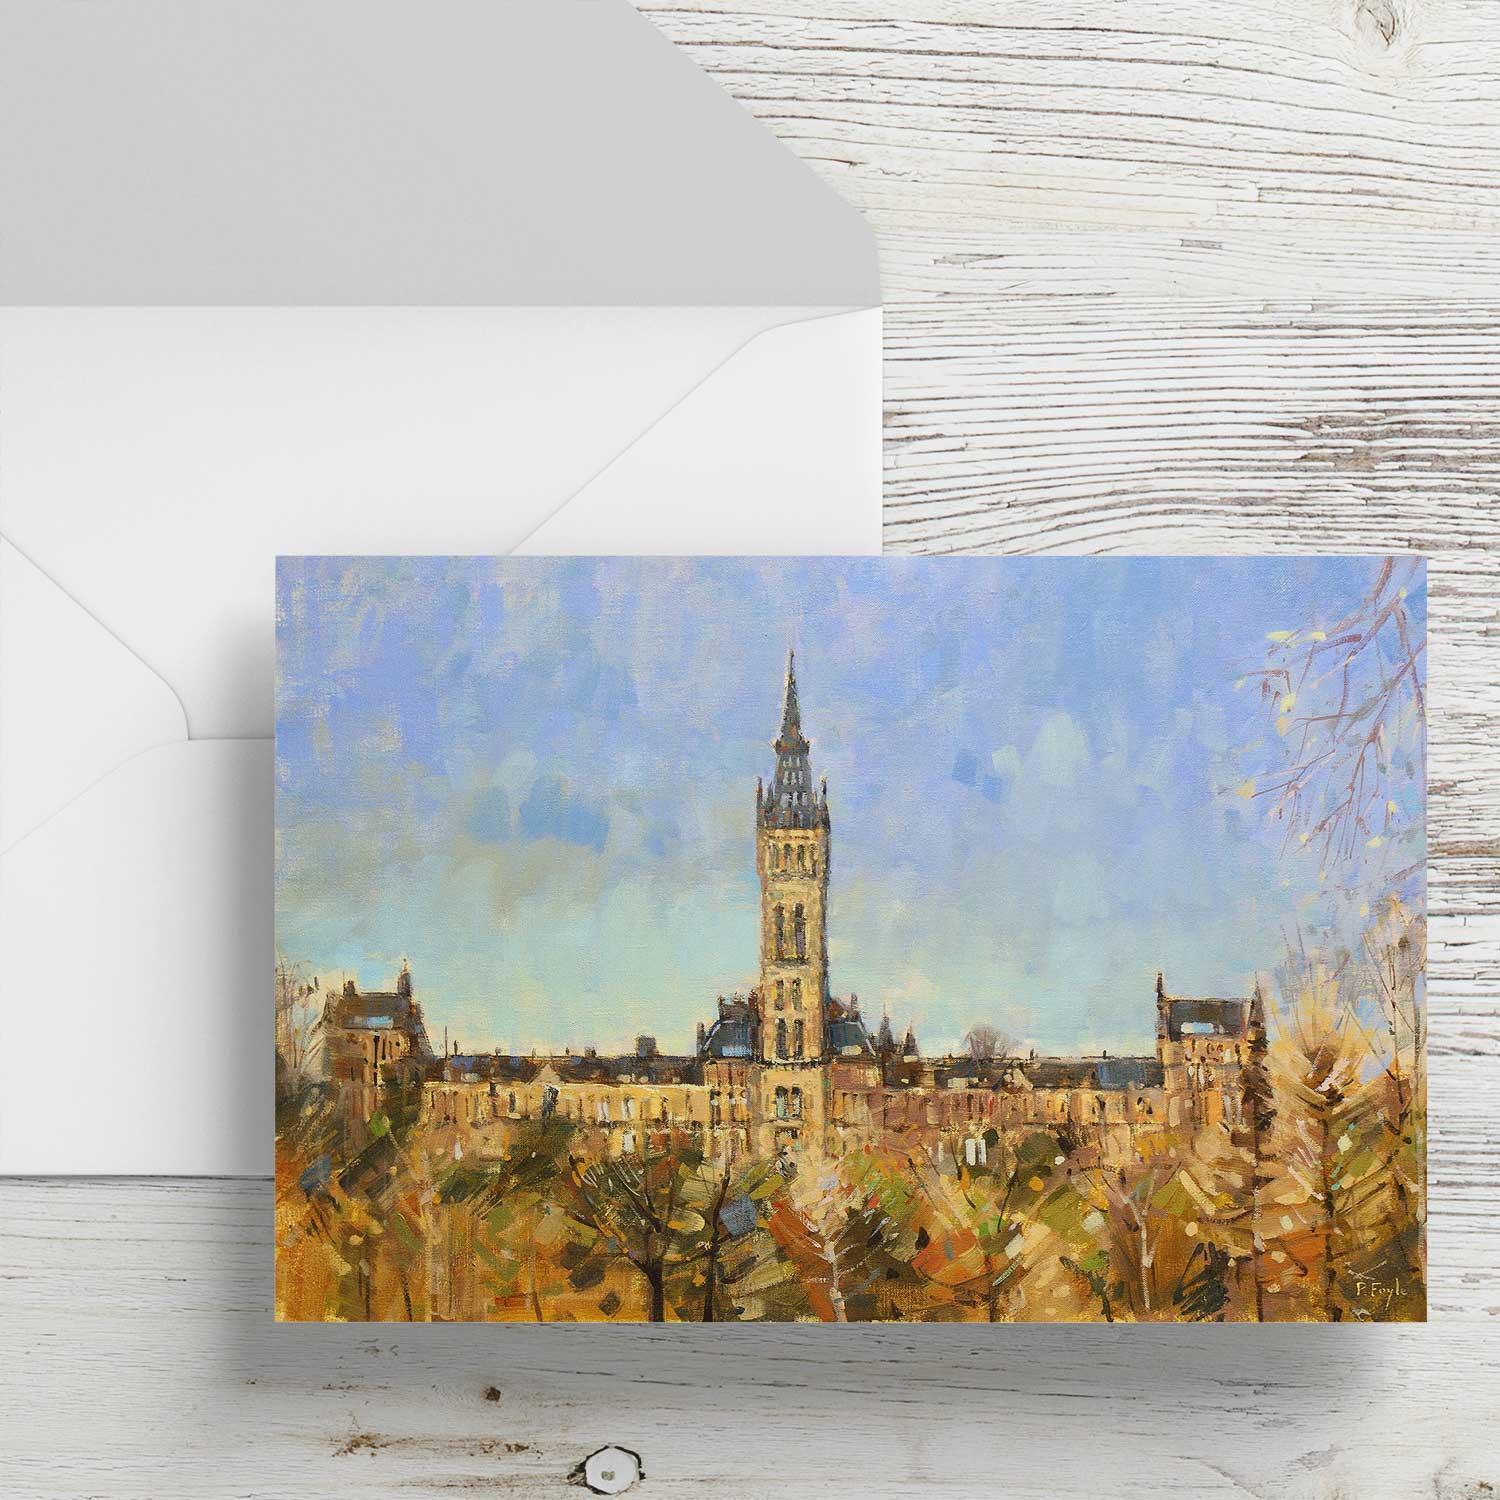 Glasgow University Greeting Card from an original painting by artist Peter Foyle